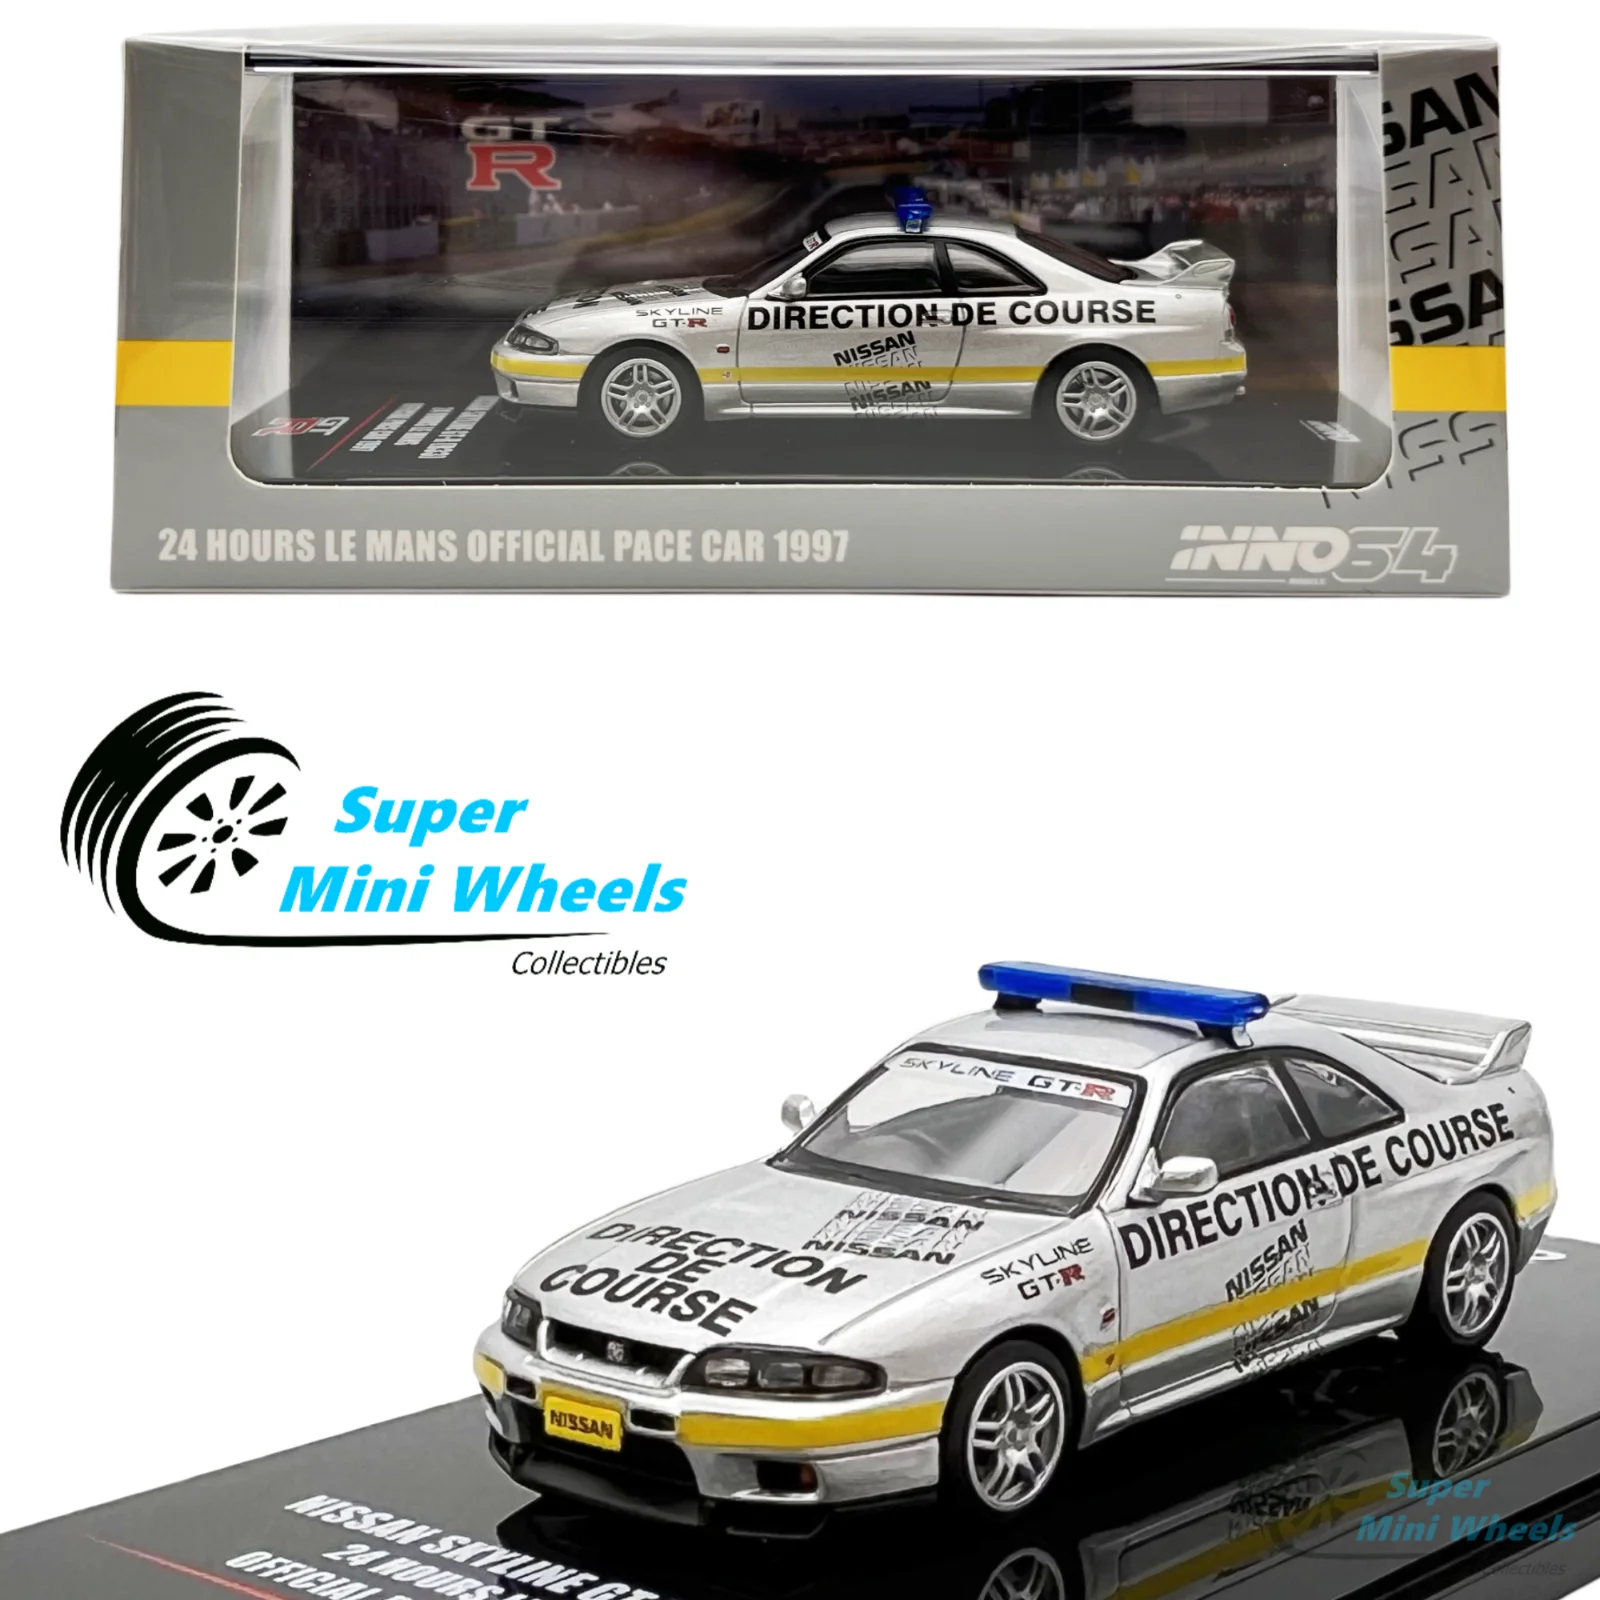 

INNO64 1:64 Skyline GT-R R33 24 Hours LE Mans Official Pace Car 1997 Diecast Model car Collection Limited Edition Hobby Toys